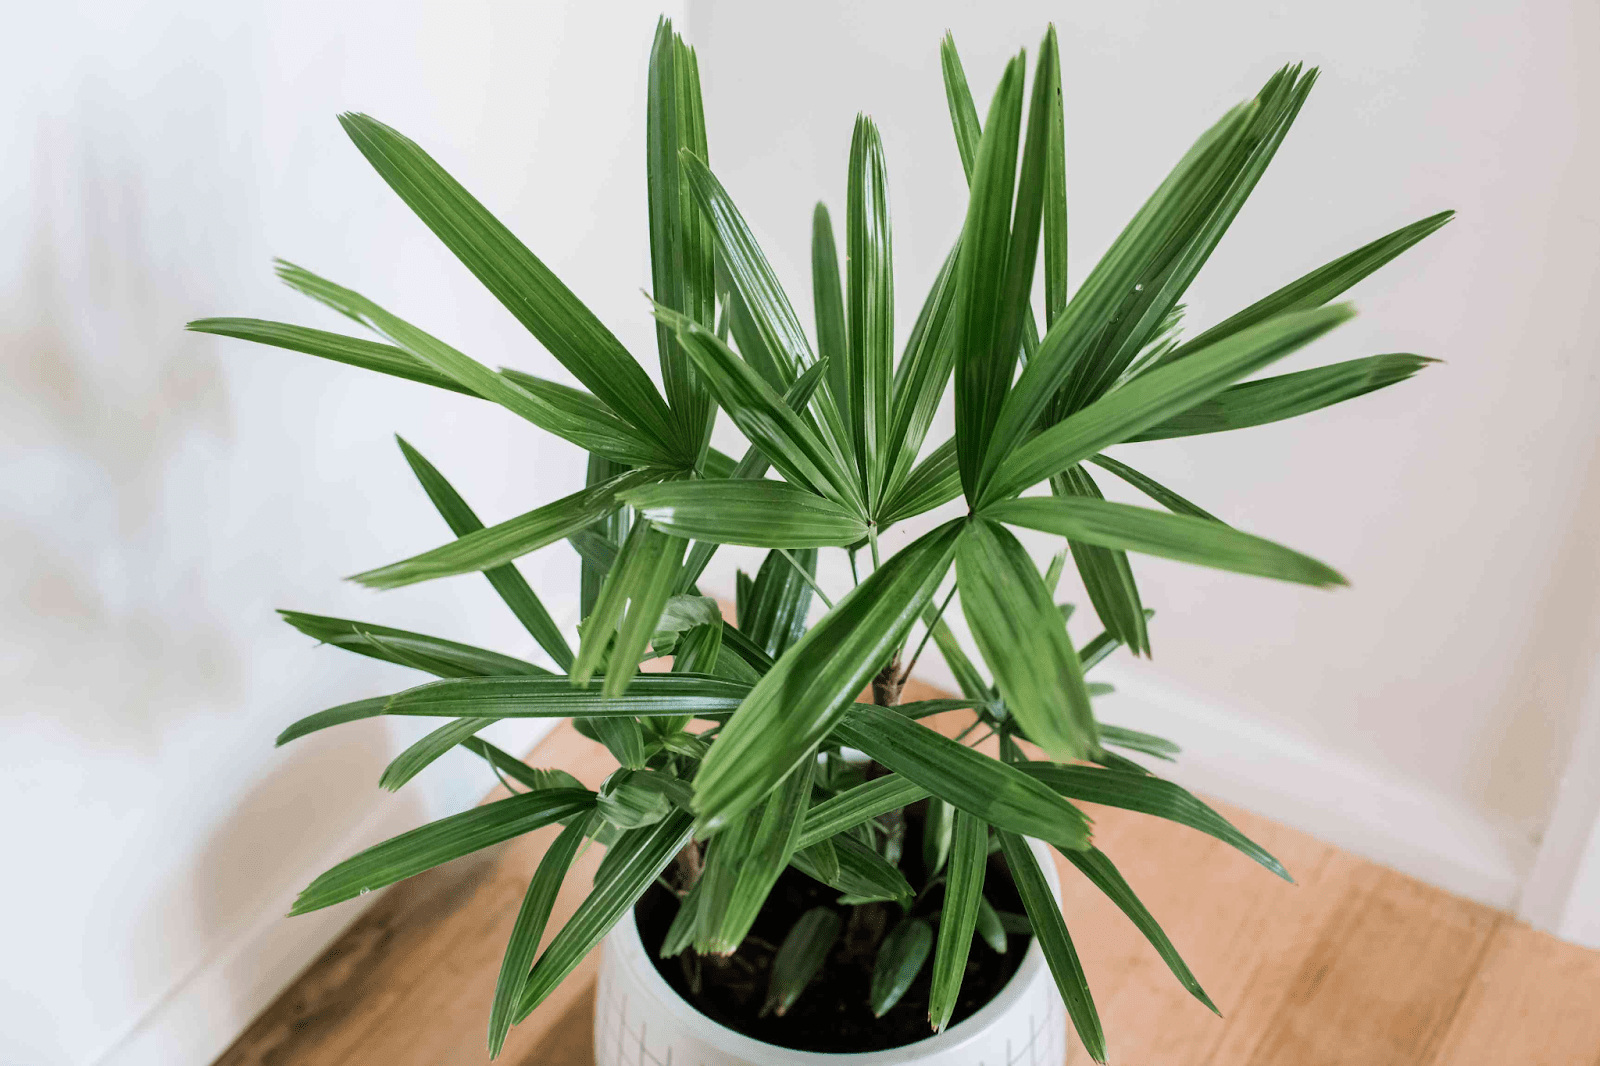 Lady palms require low maintenance, adapt well to different soils and can survive in low light. Source: The Spruce.